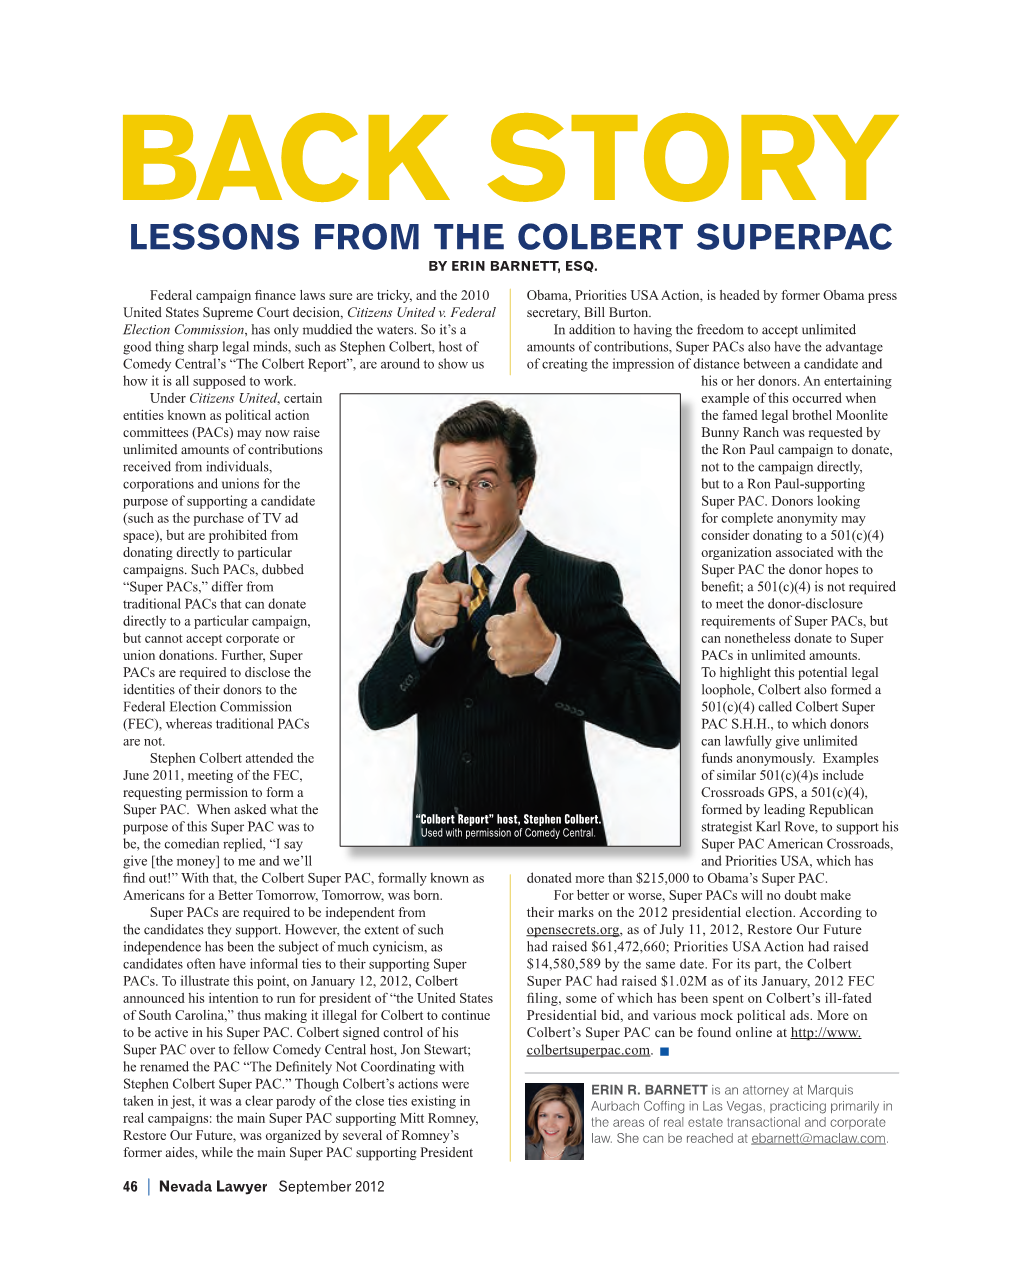 Back Story: Lessons from the Colbert Super